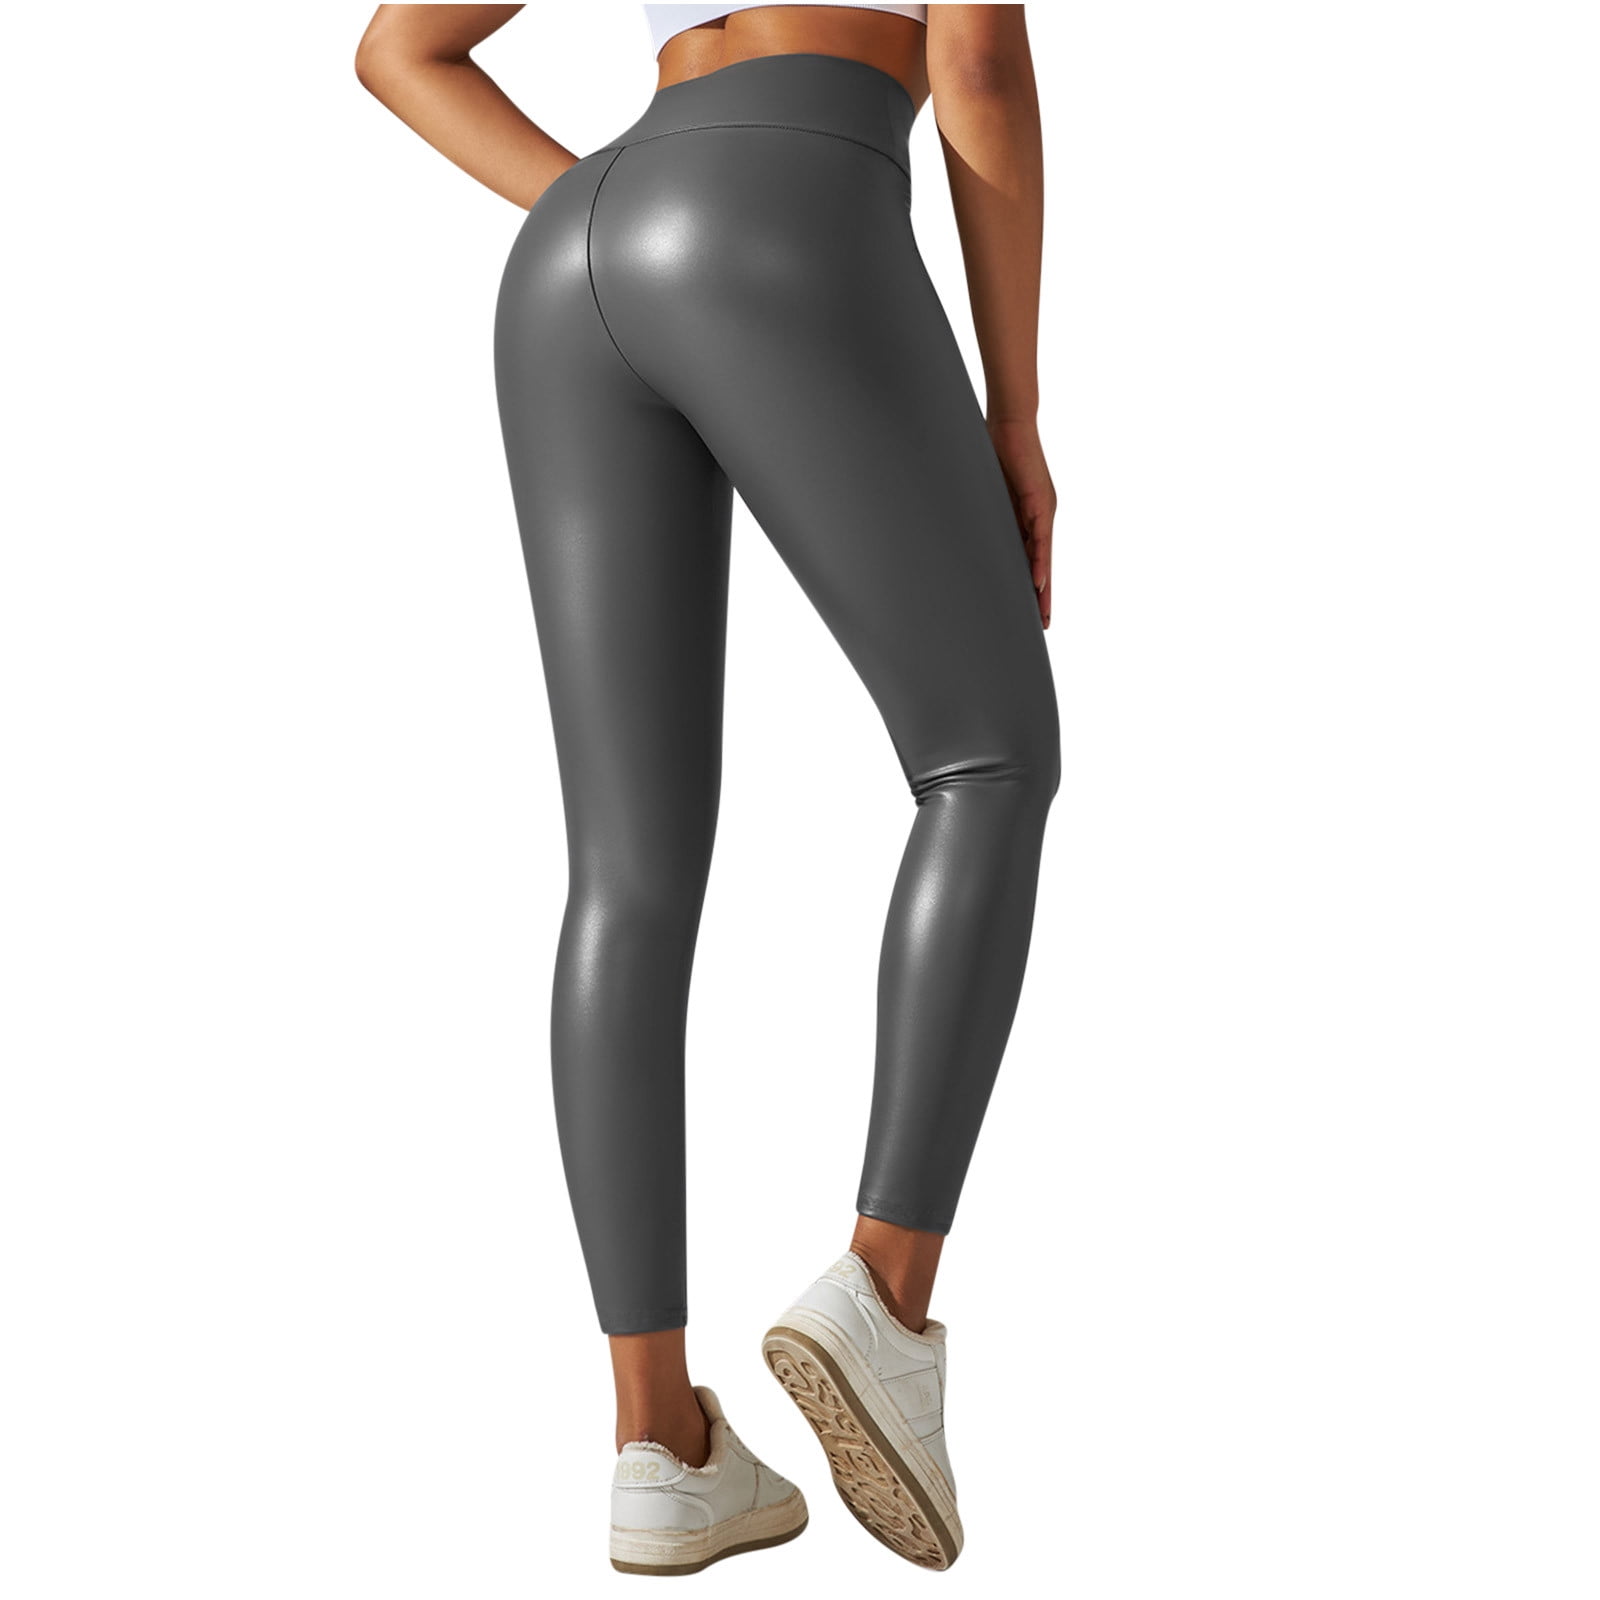 Black High Waist PU Leather Skinny High Waisted Leather Leggings With Push  Up Effect Nessaj Plus Size Spandex Trousers With 10% Discount 211108 From  Dou04, $11.08